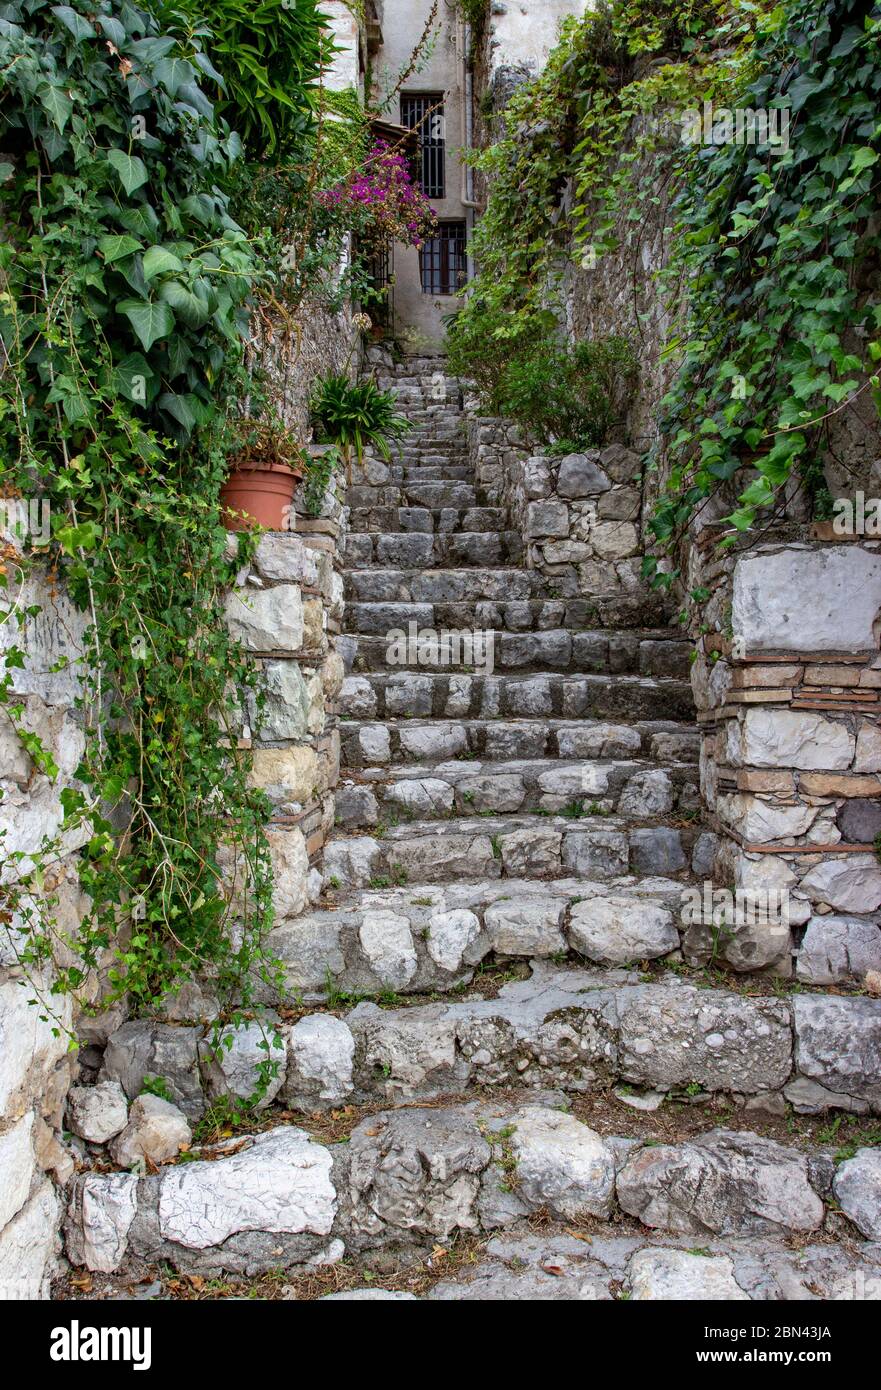 A narrow stone staircase ascends towards a house in the town of Saint-Paul-de-Vence, France Stock Photo